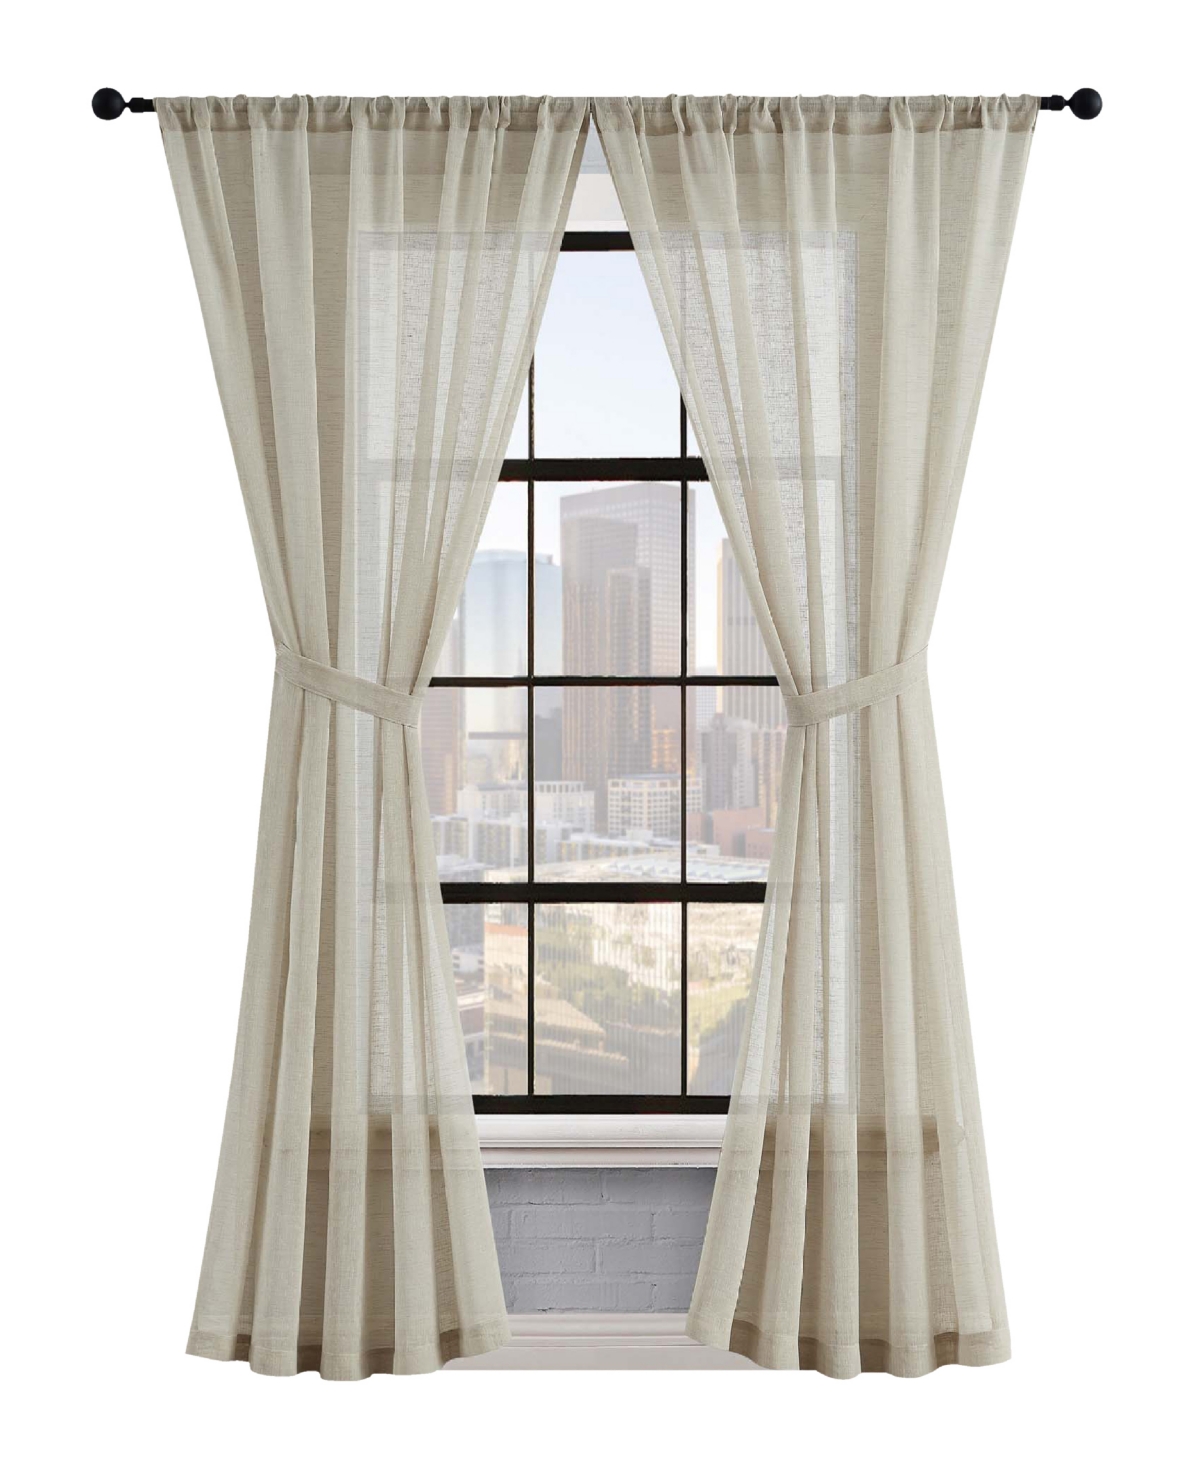 LUCKY BRAND ONYX TEXTURED SHEER VOILE LIGHT FILTERING ROD POCKET WINDOW CURTAIN PANEL PAIR WITH TIEBACKS, 52" X 